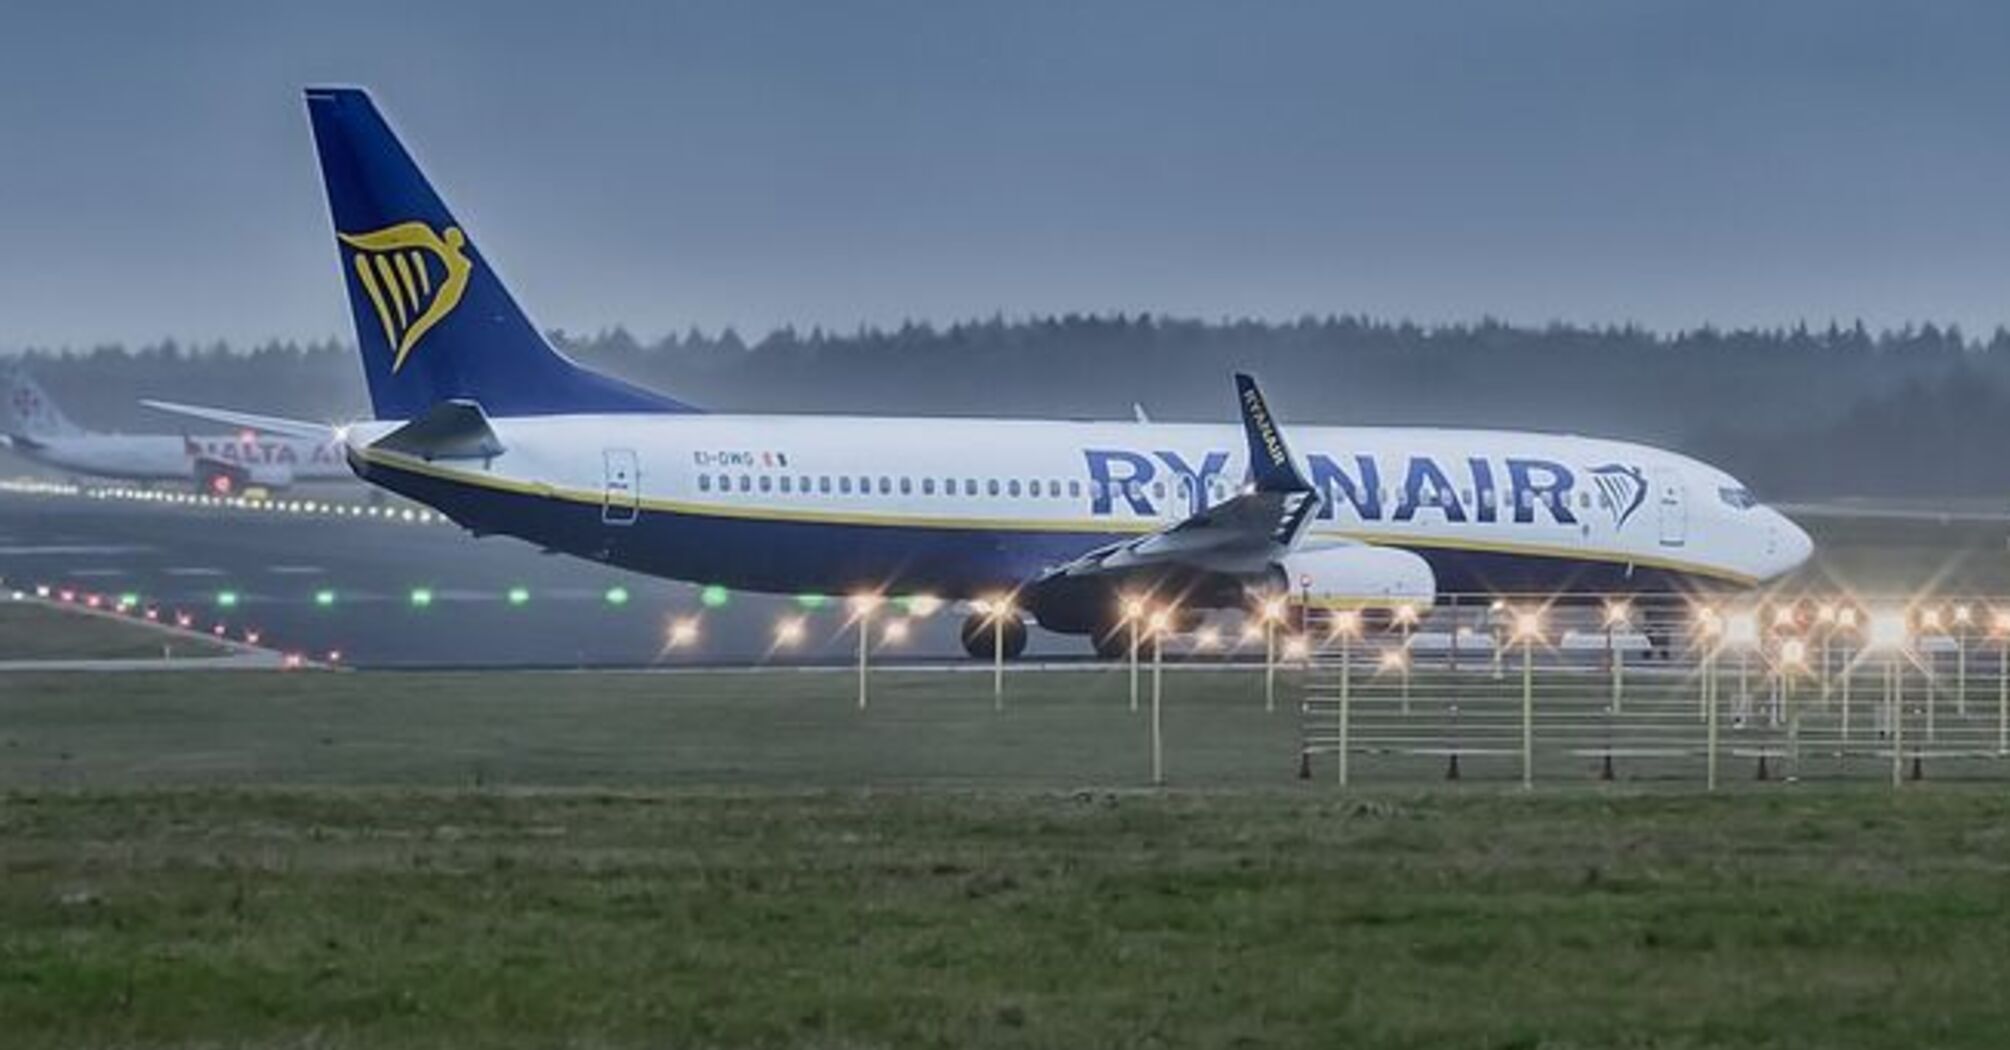 Ryanair passengers say they slept on the floor after being stranded at airport for days: what the carrier says